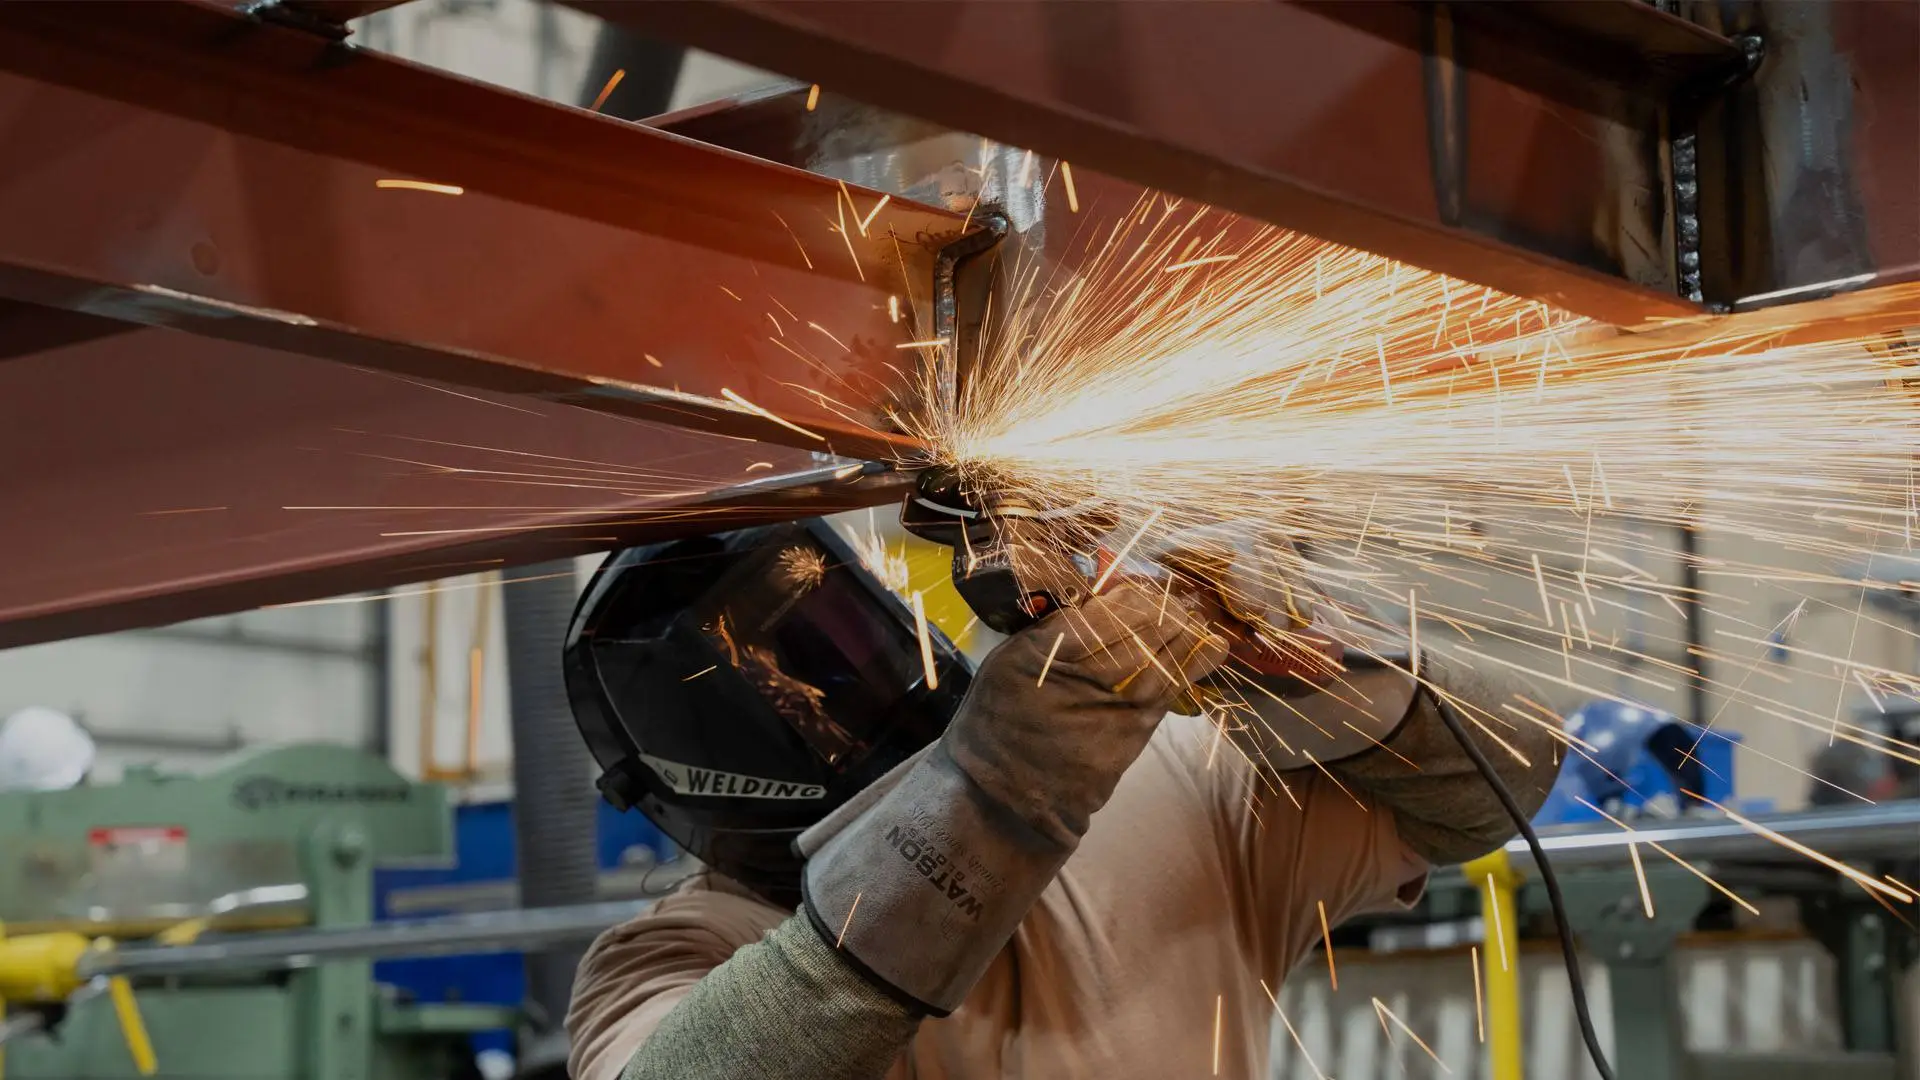 Weekend classes for our Professional Welding program are now available at the TWS - Dallas Metro Campus!